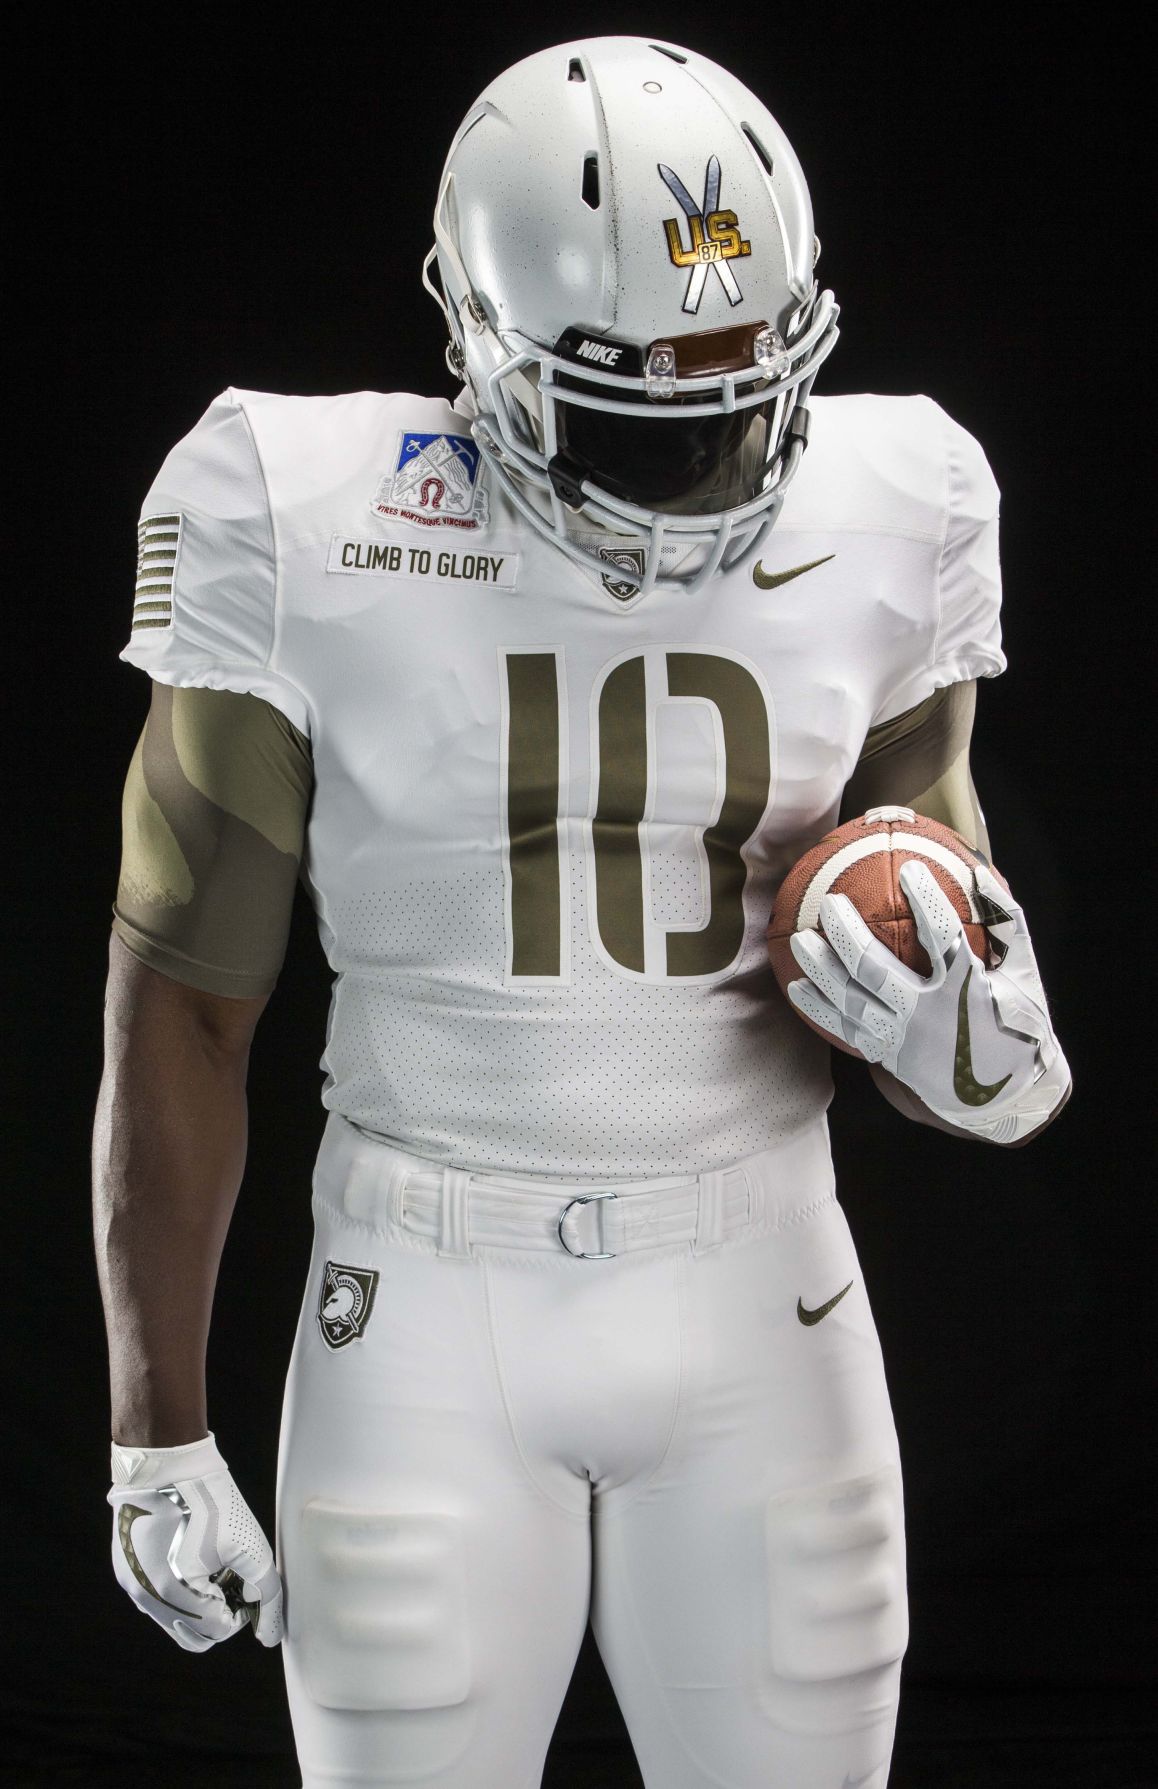 Army uniforms for Navy game to honor 